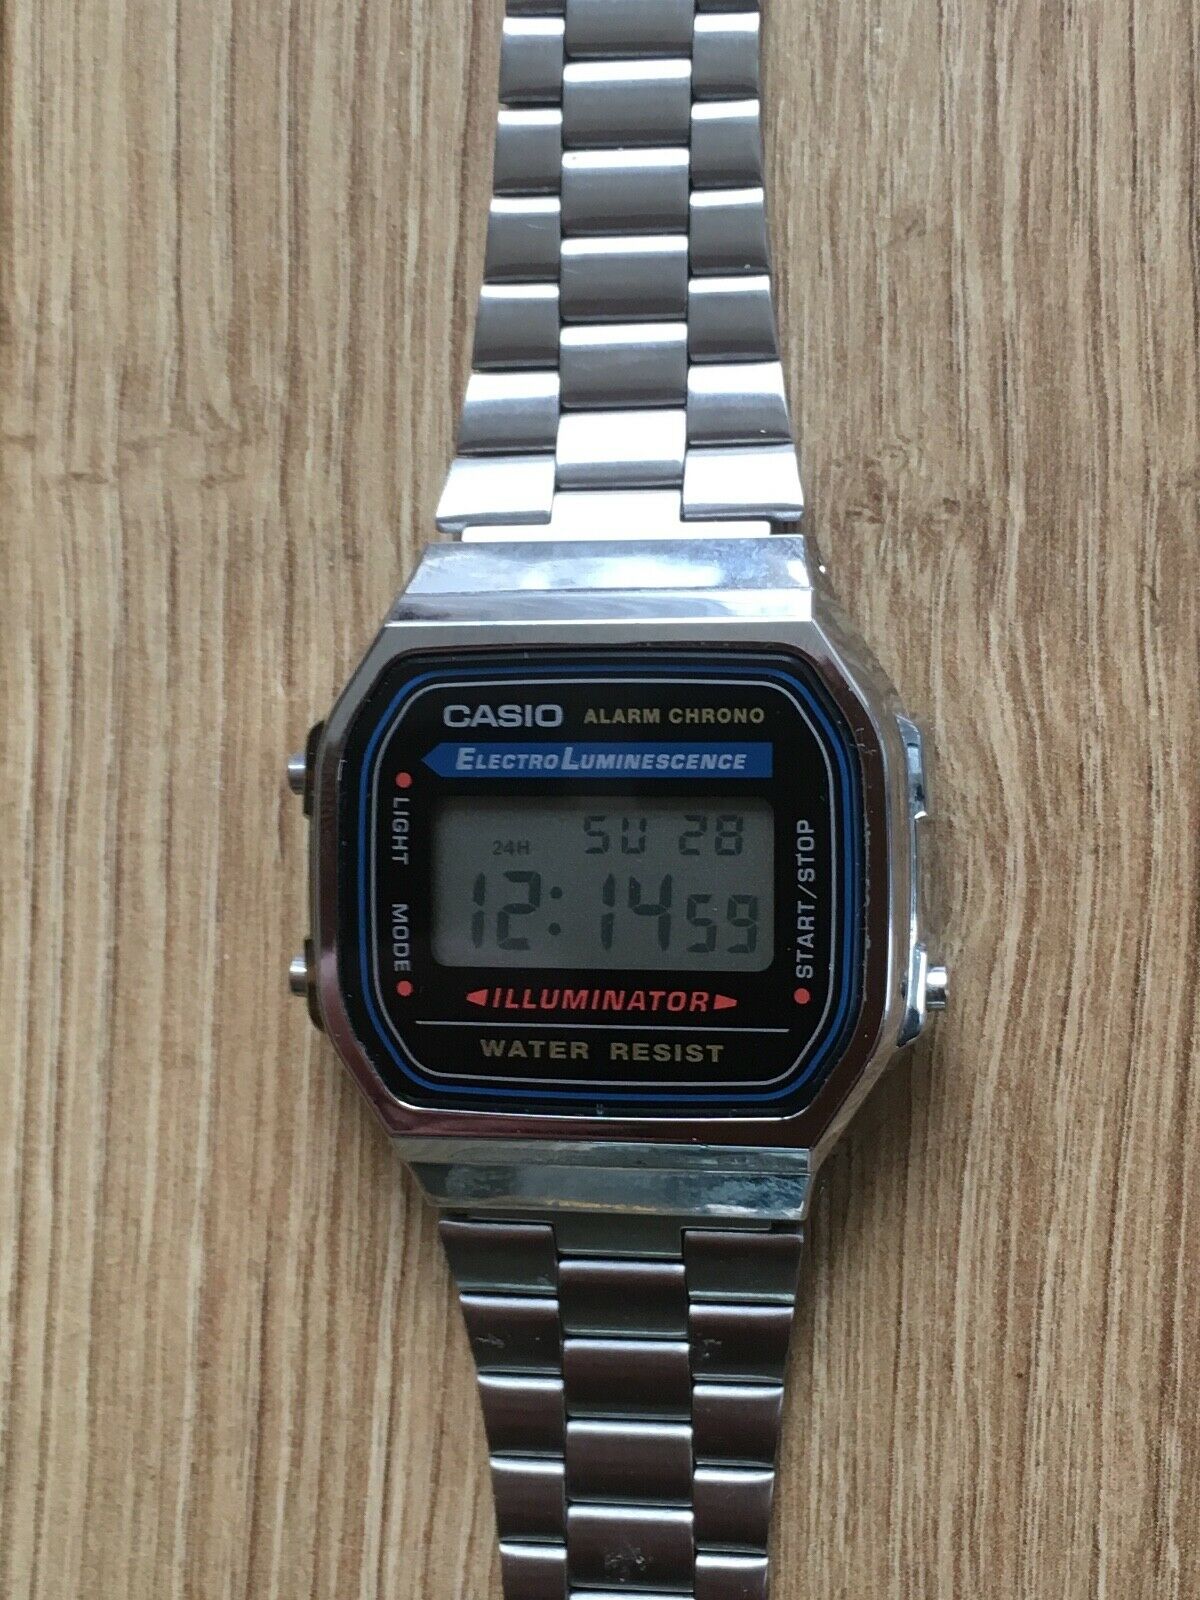 stainless steel back casio